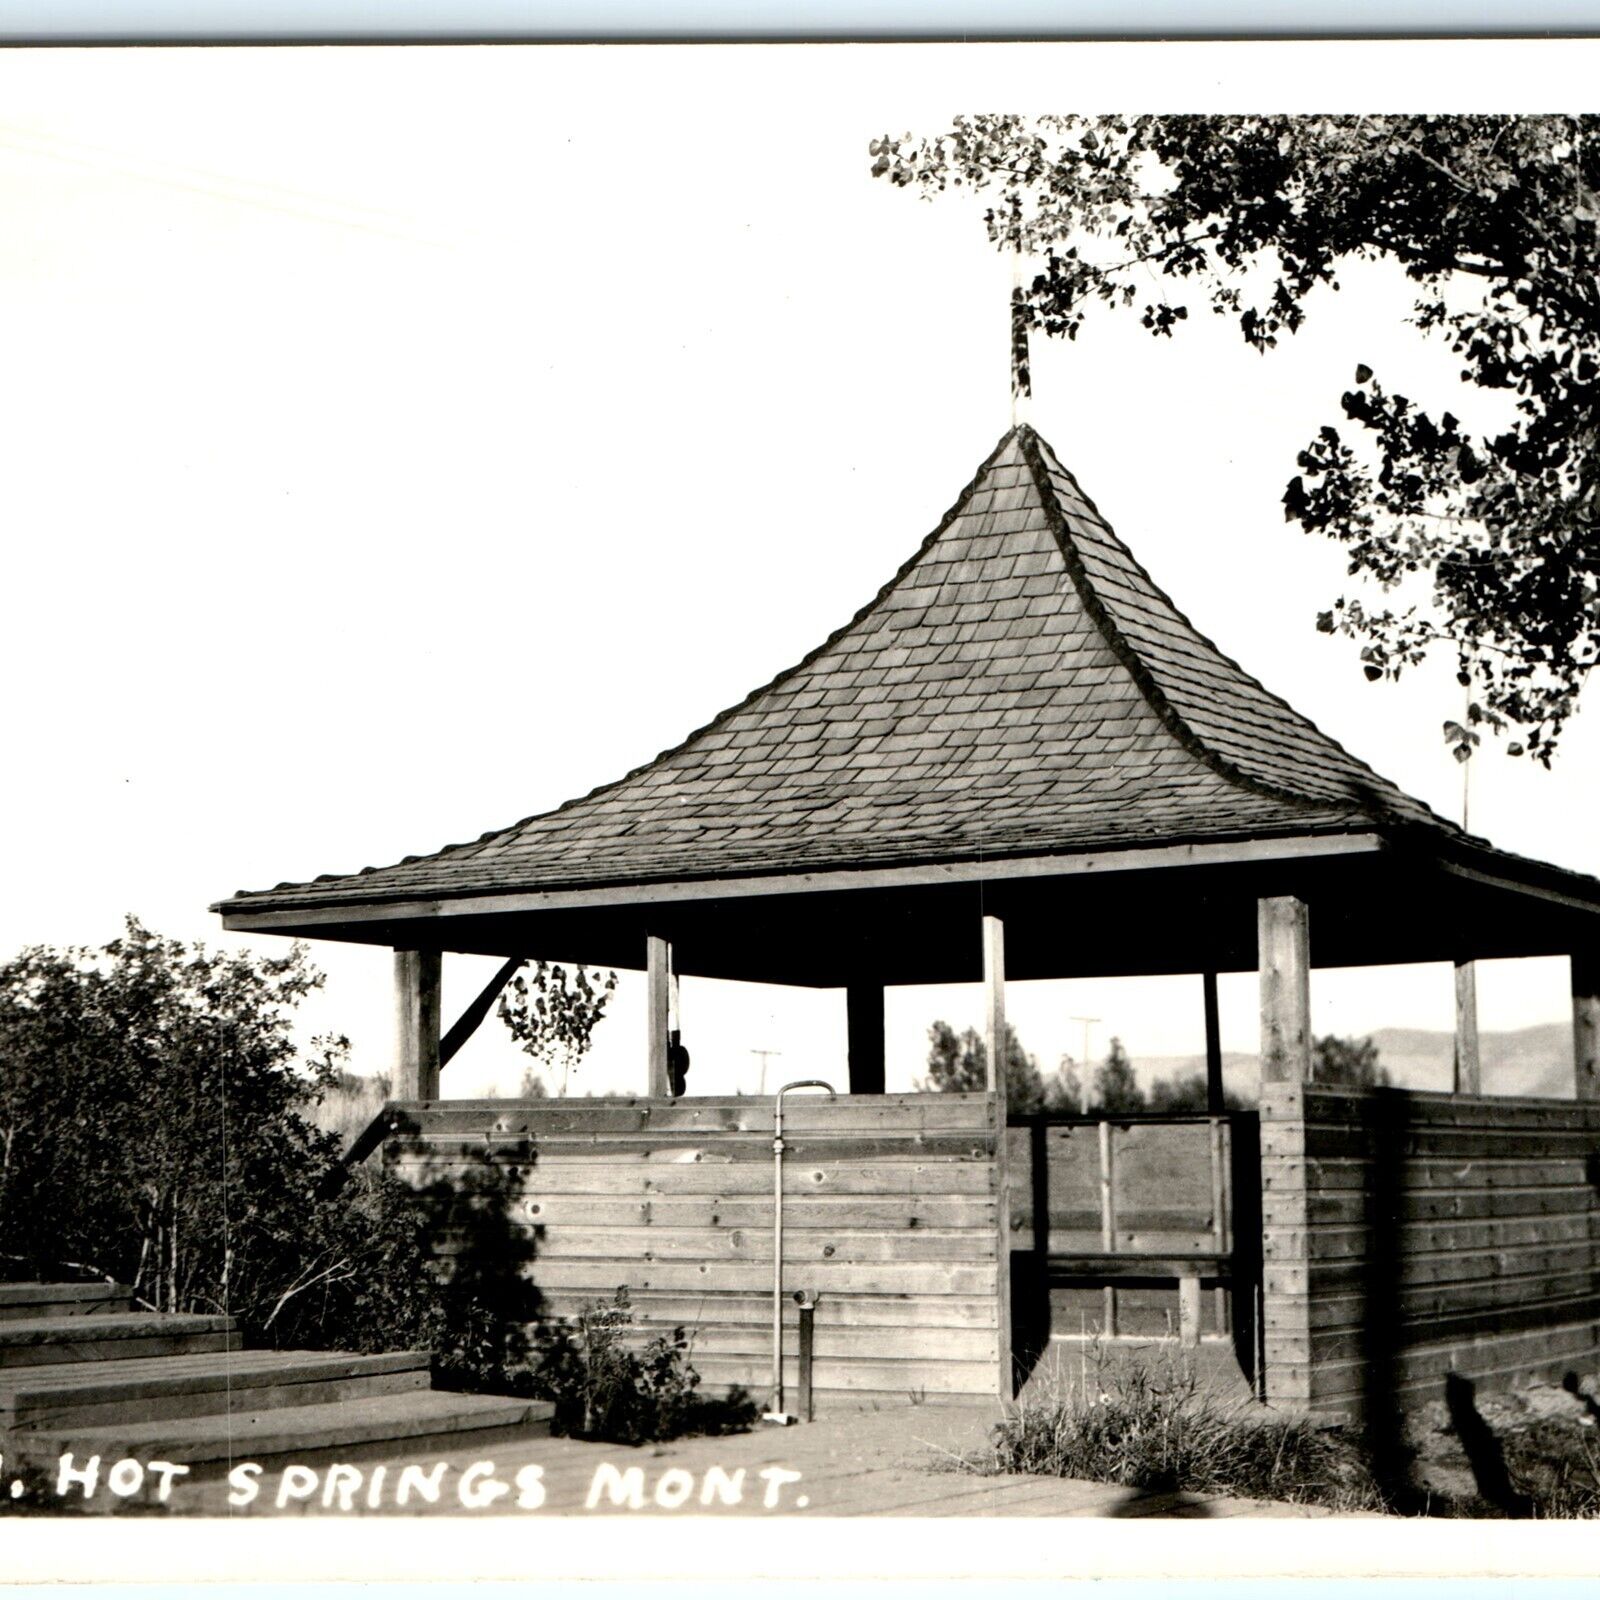 c1940s Hot Springs, MT Fountain Shelter RPPC Real Photo Postcard J.W. Meiers A68